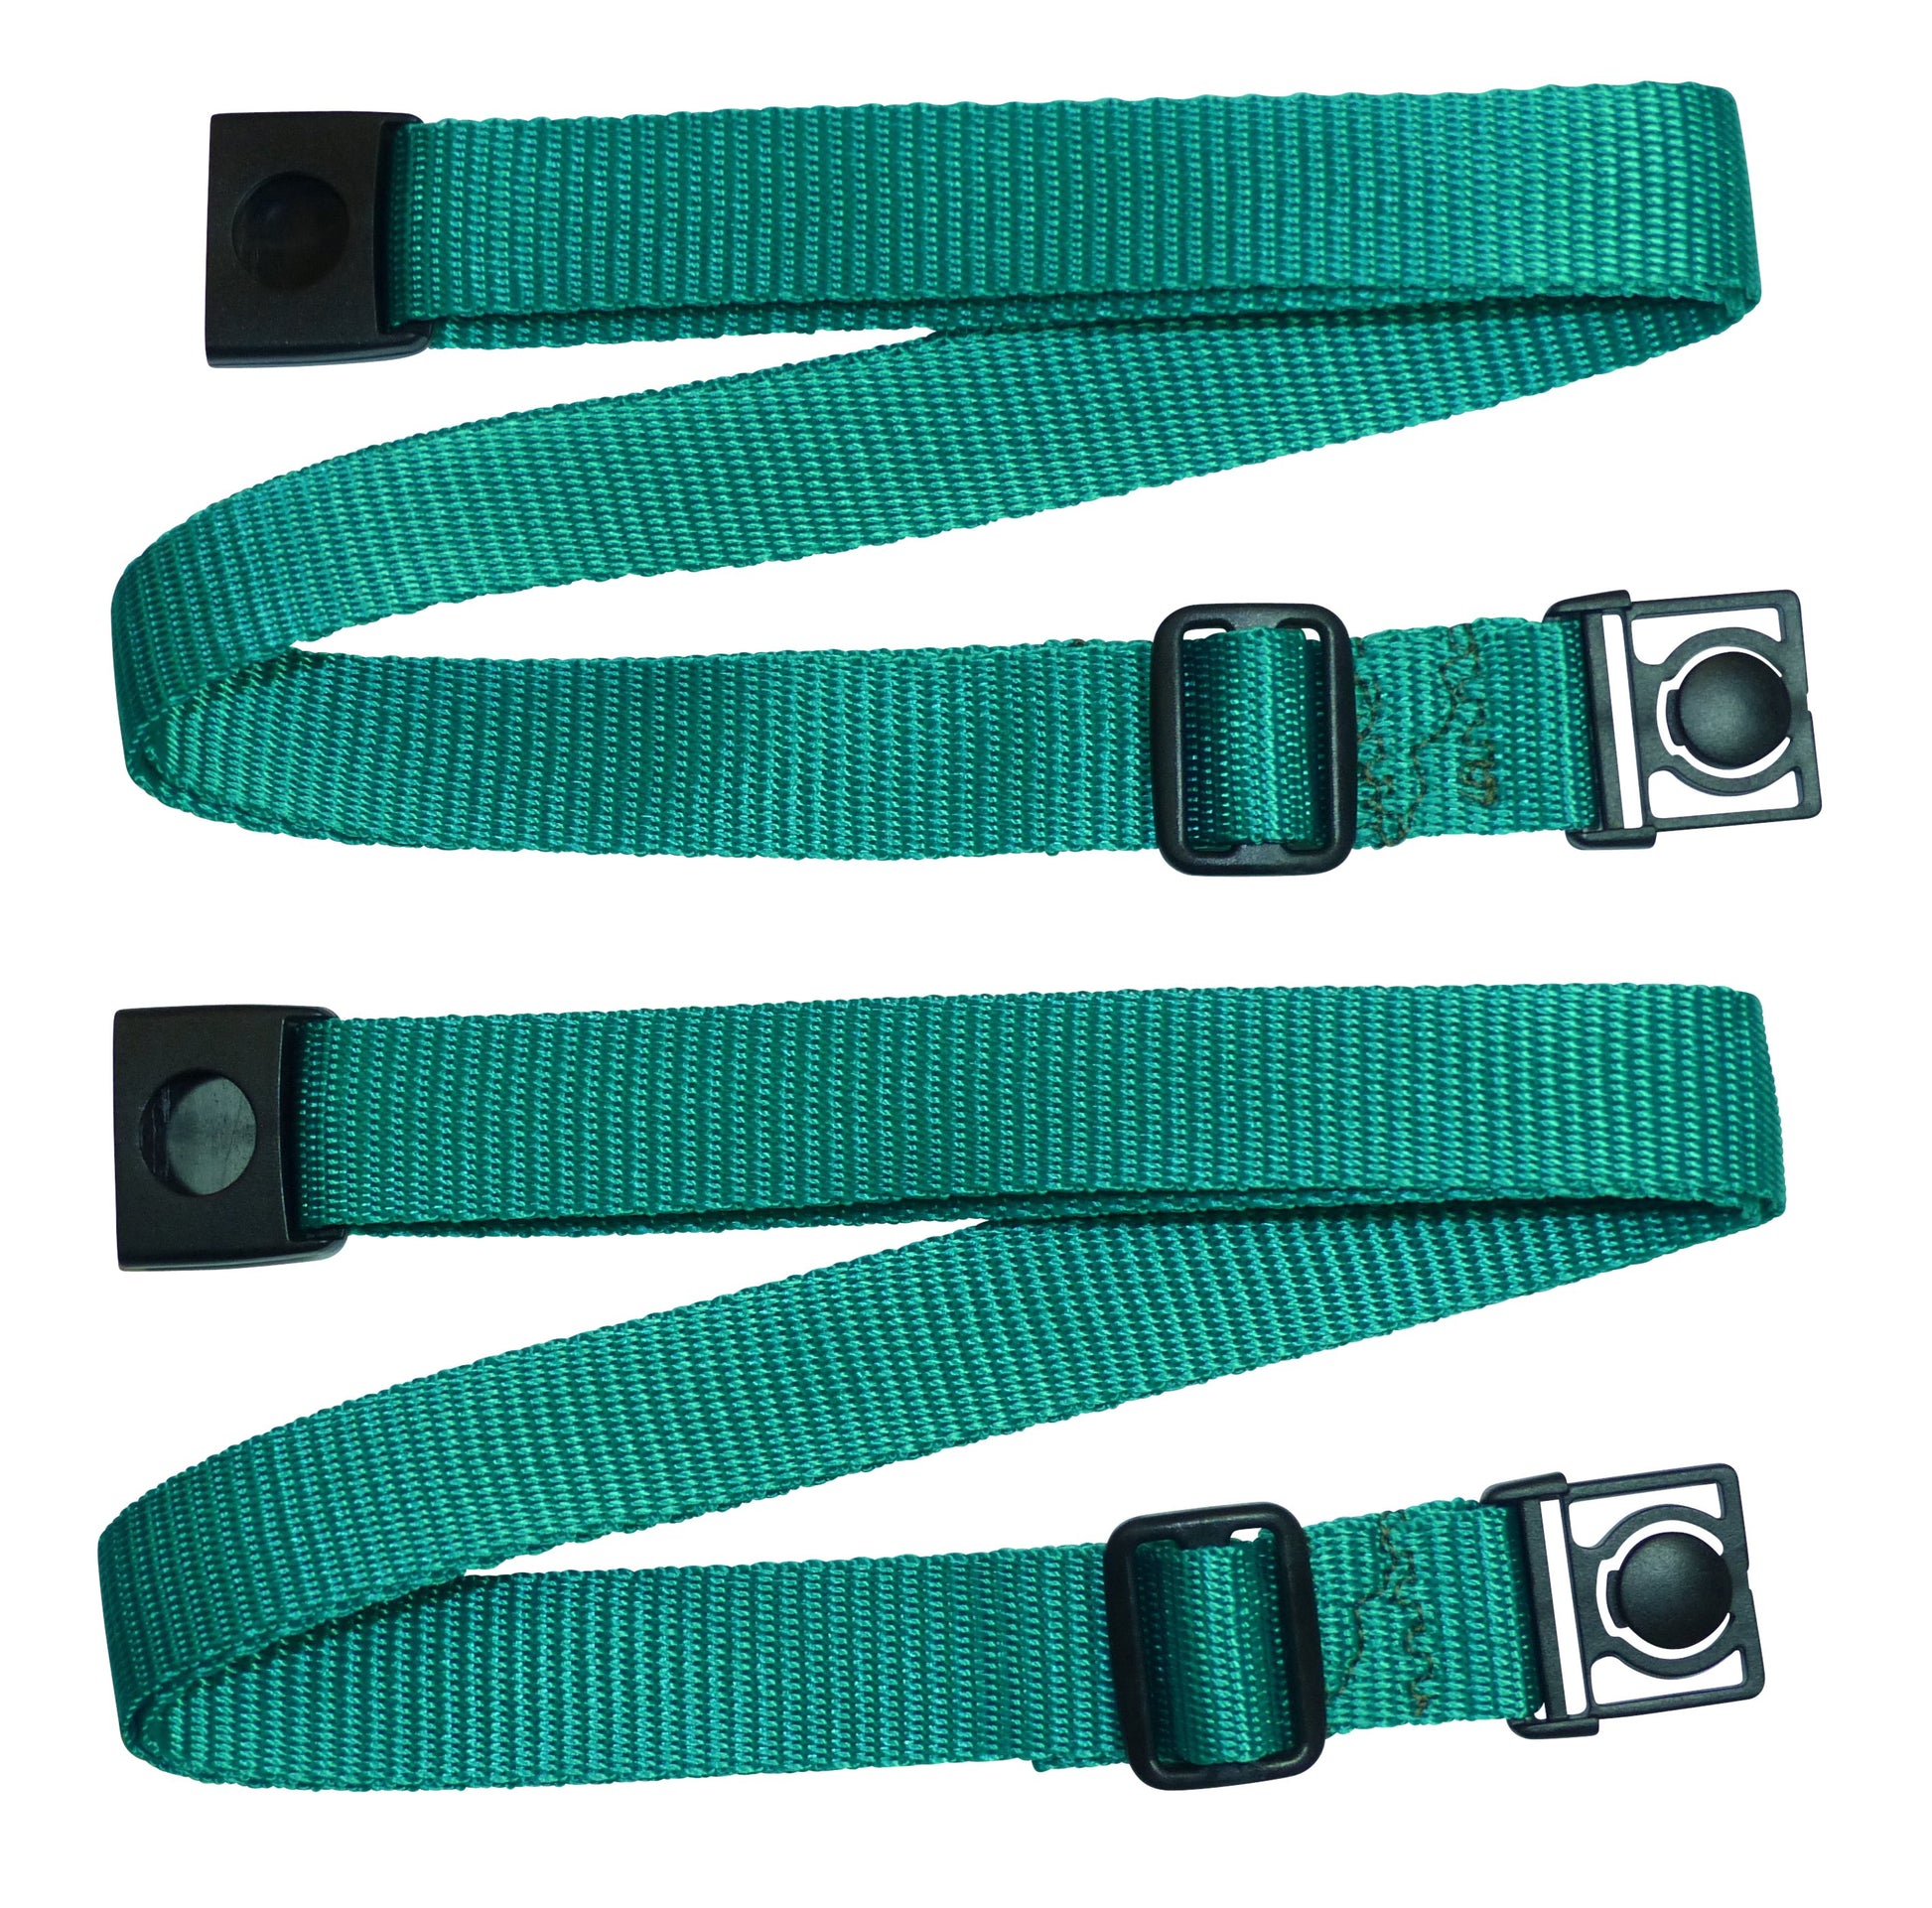 Benristraps 25mm Webbing Strap with Button Release and Triglide Slider Buckles (Pair) in Emerald